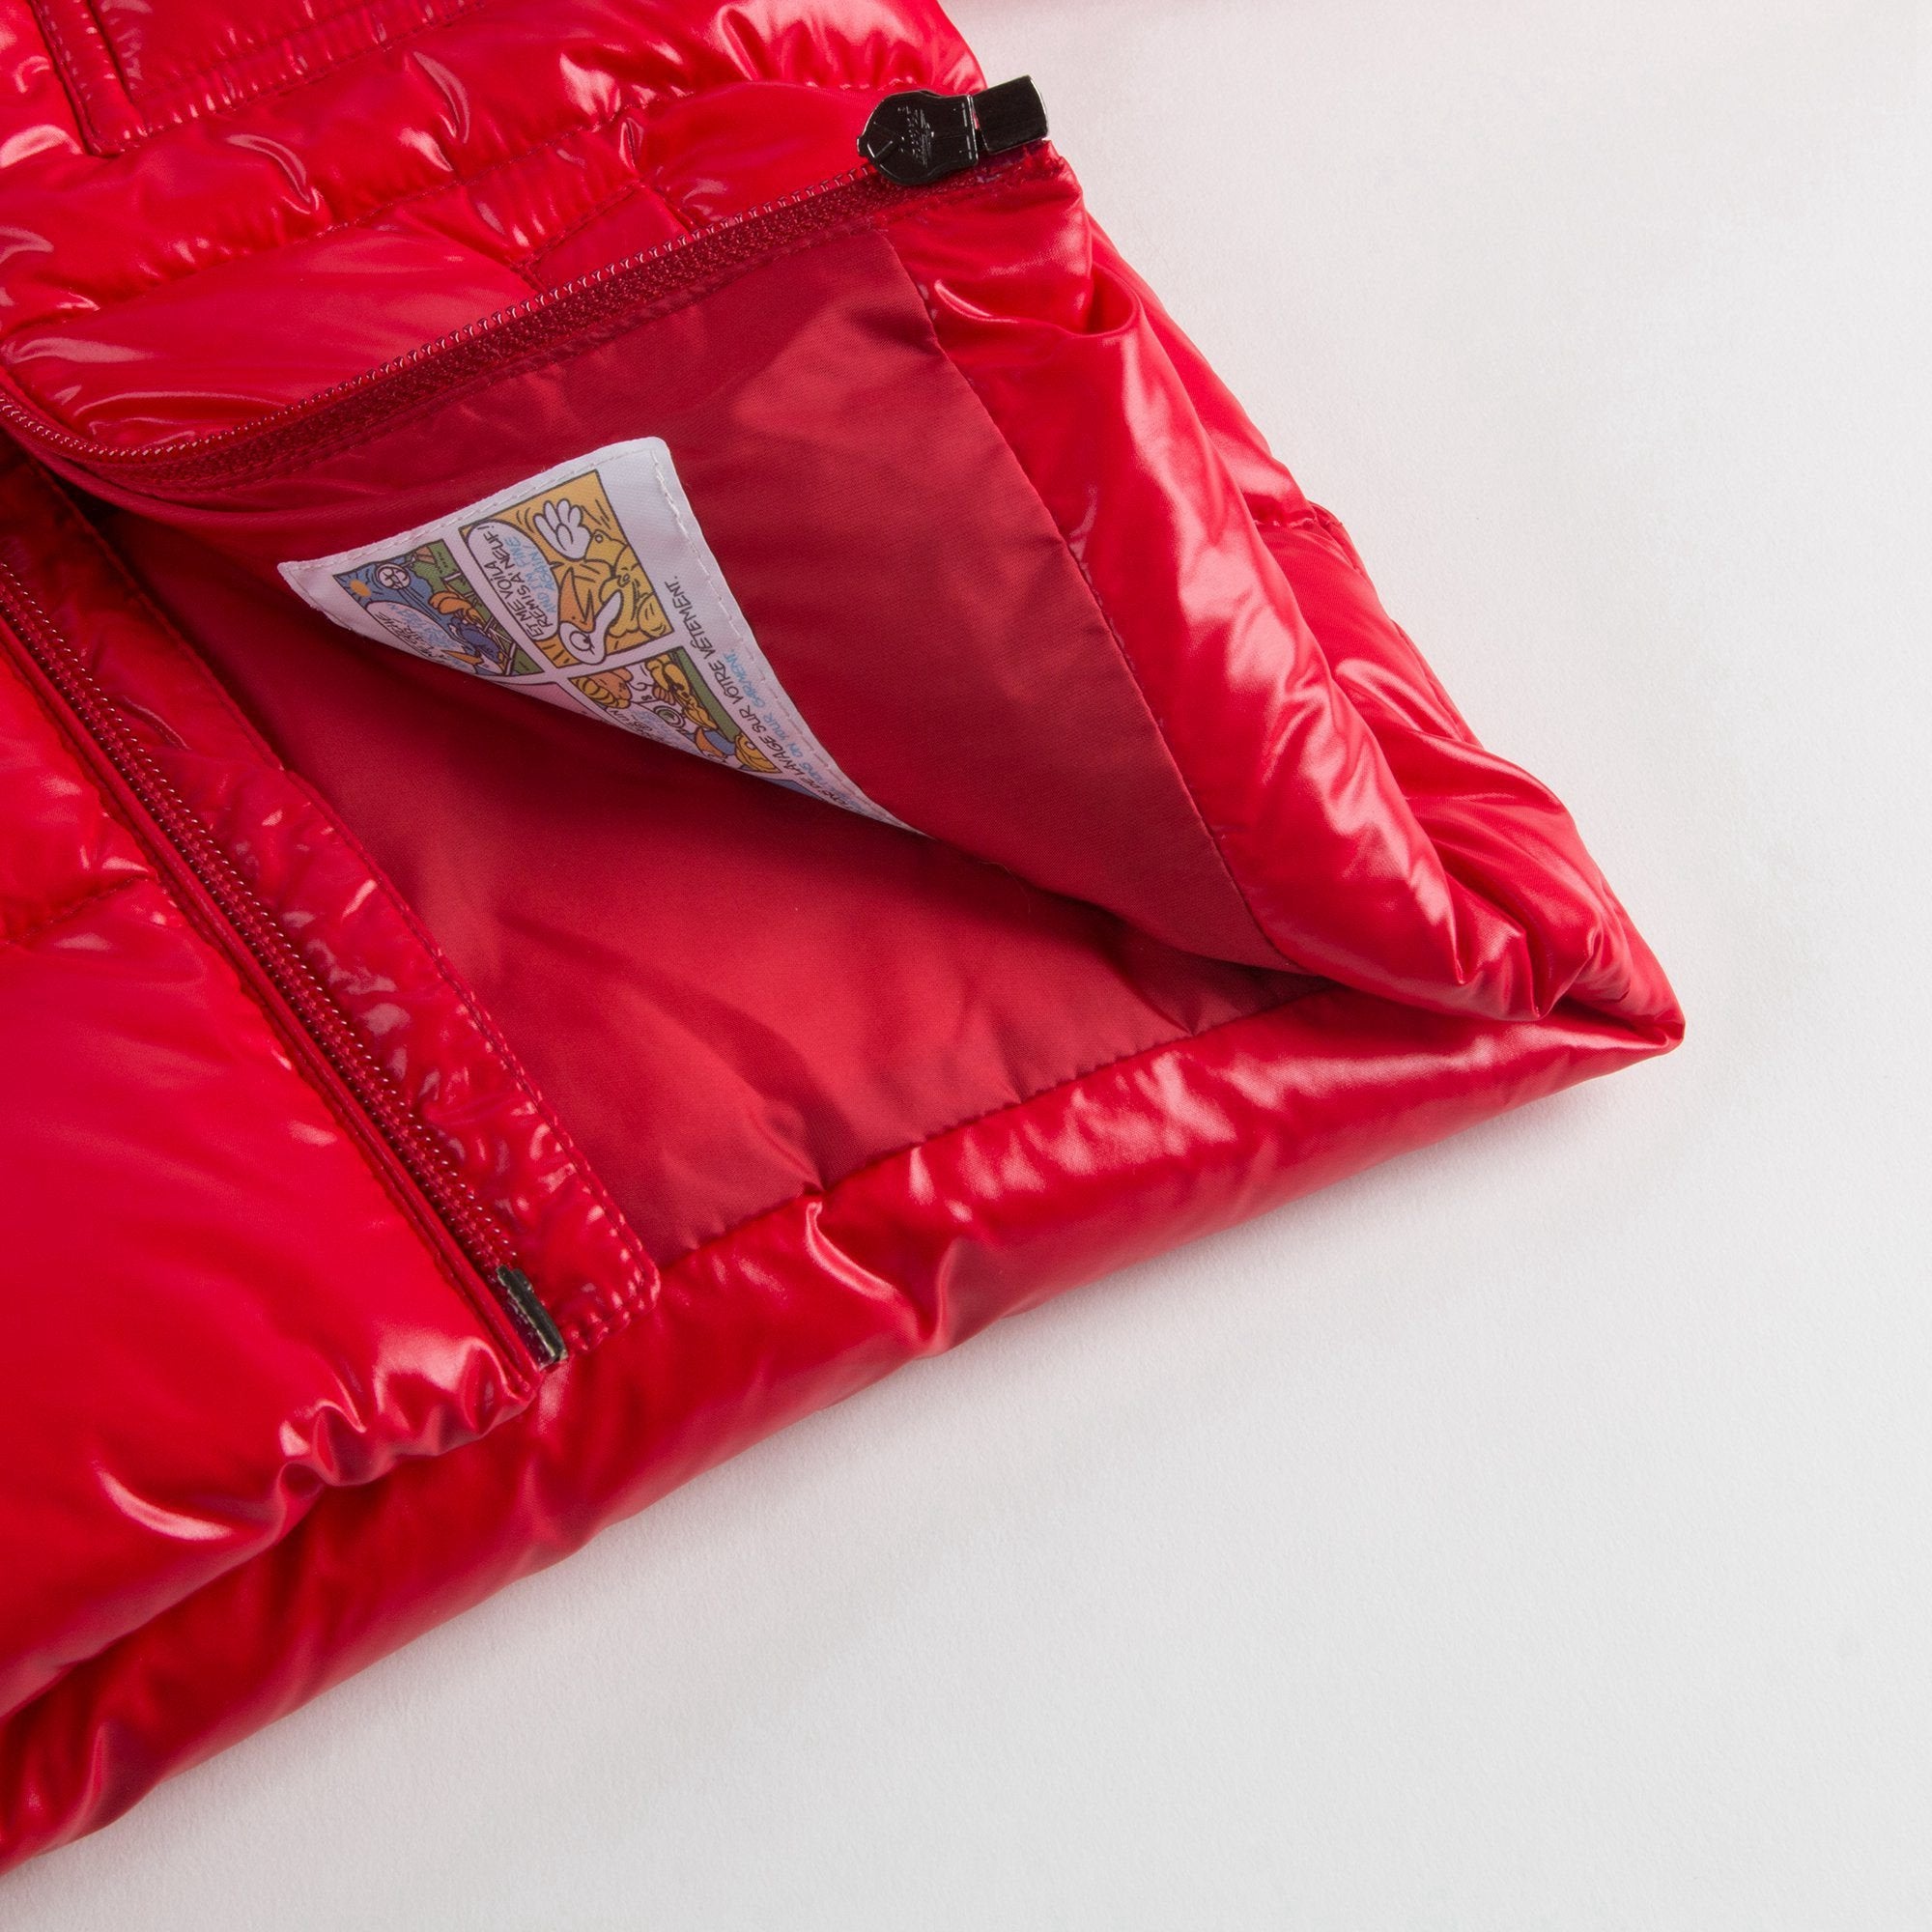 Baby Girls Red "K2" Padded Down Jacket